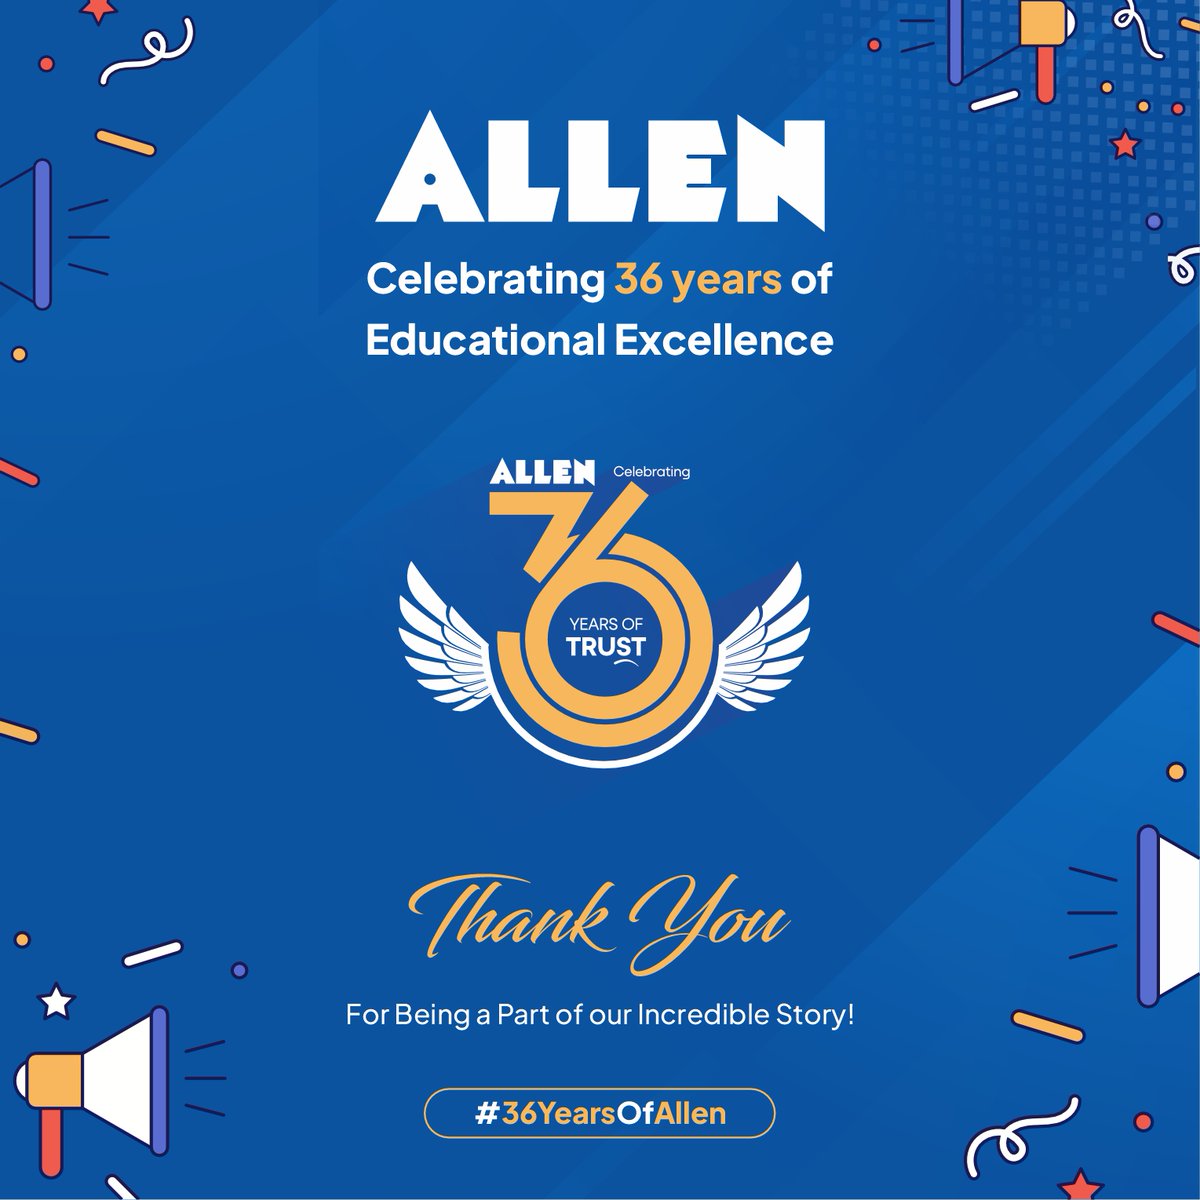 🎊ALLEN turns 36! That’s right, 36 years of excellence. Let’s celebrate this milestone. We promise to keep the classes engaging, continue delivering outstanding results, and nurture the young minds.

🎊Happy Foundation Day!  

#FoundationDay #ALLEN #36YearsofALLEN #HarGharMeALLEN